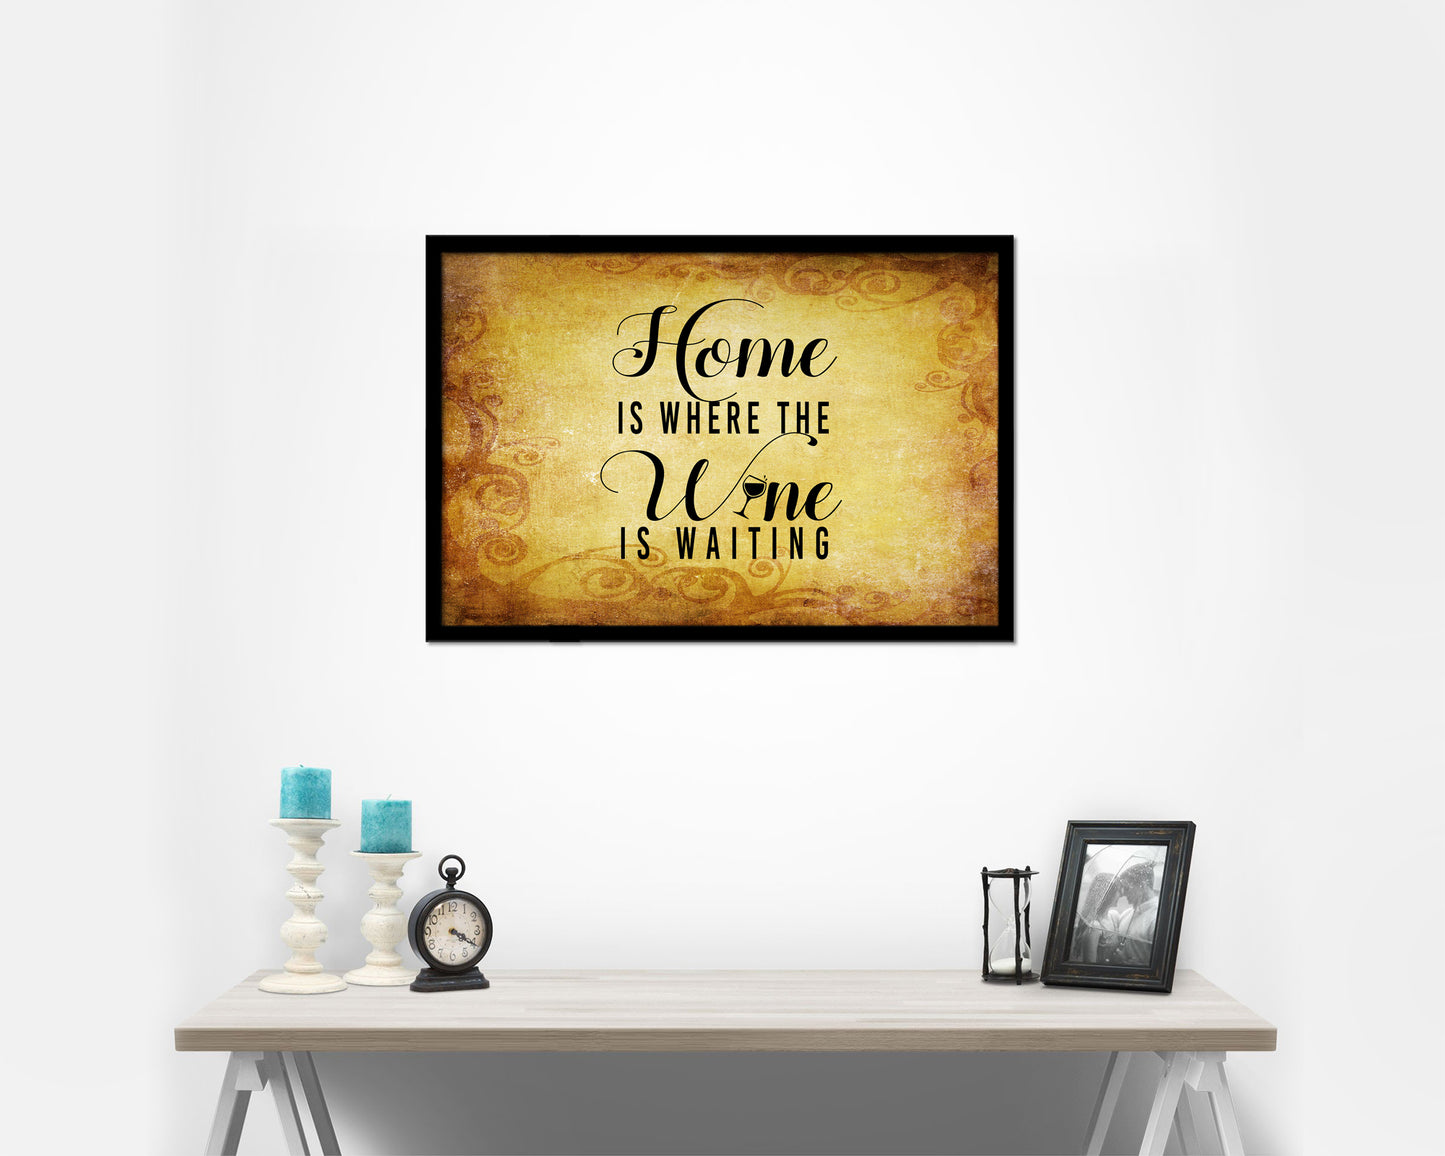 Home is where the w*n is waiting Quote Framed Print Wall Decor Art Gifts